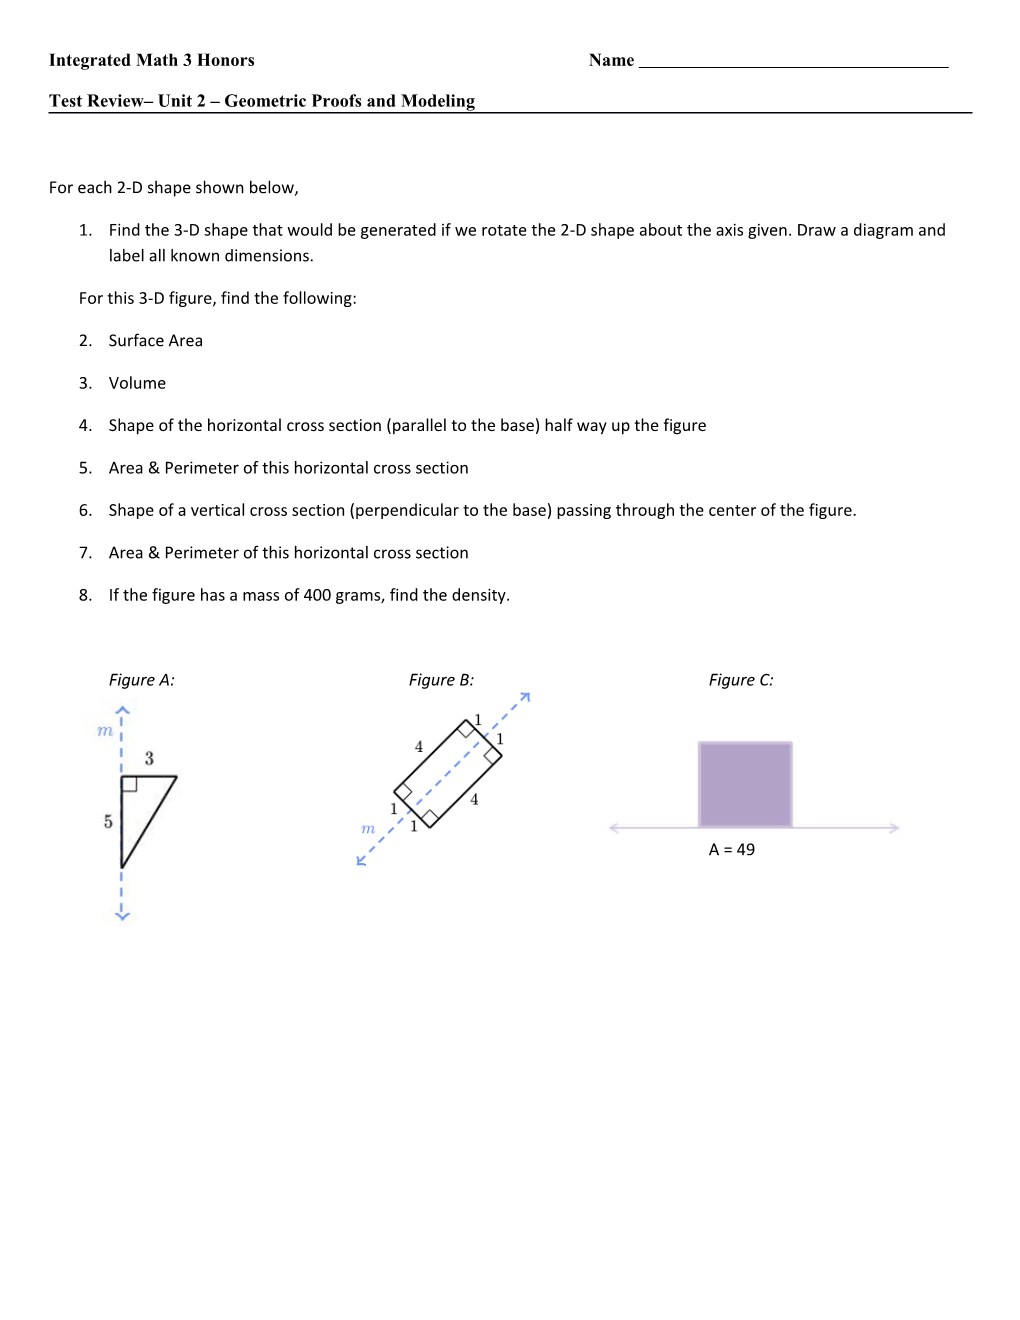 Test Review Unit 2 Geometric Proofs and Modeling